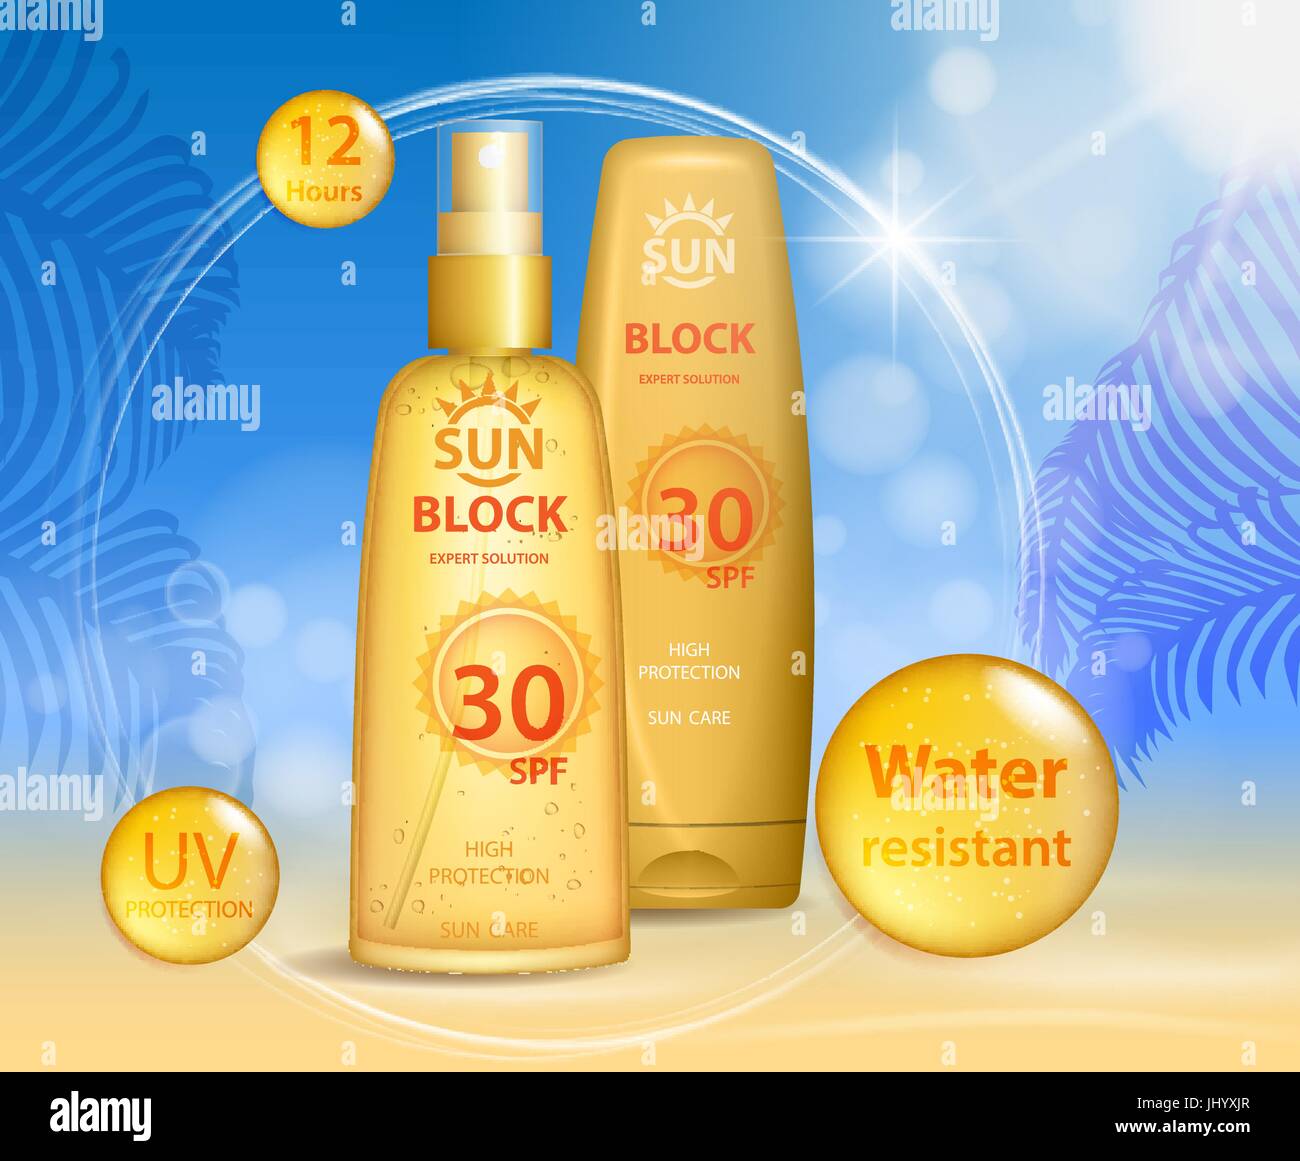 Sun protection, sunscreen and sunbath cosmetic products design face and body lotion with UV protection on palm beach summer background. Sunblock ads template. vector illustration Stock Vector